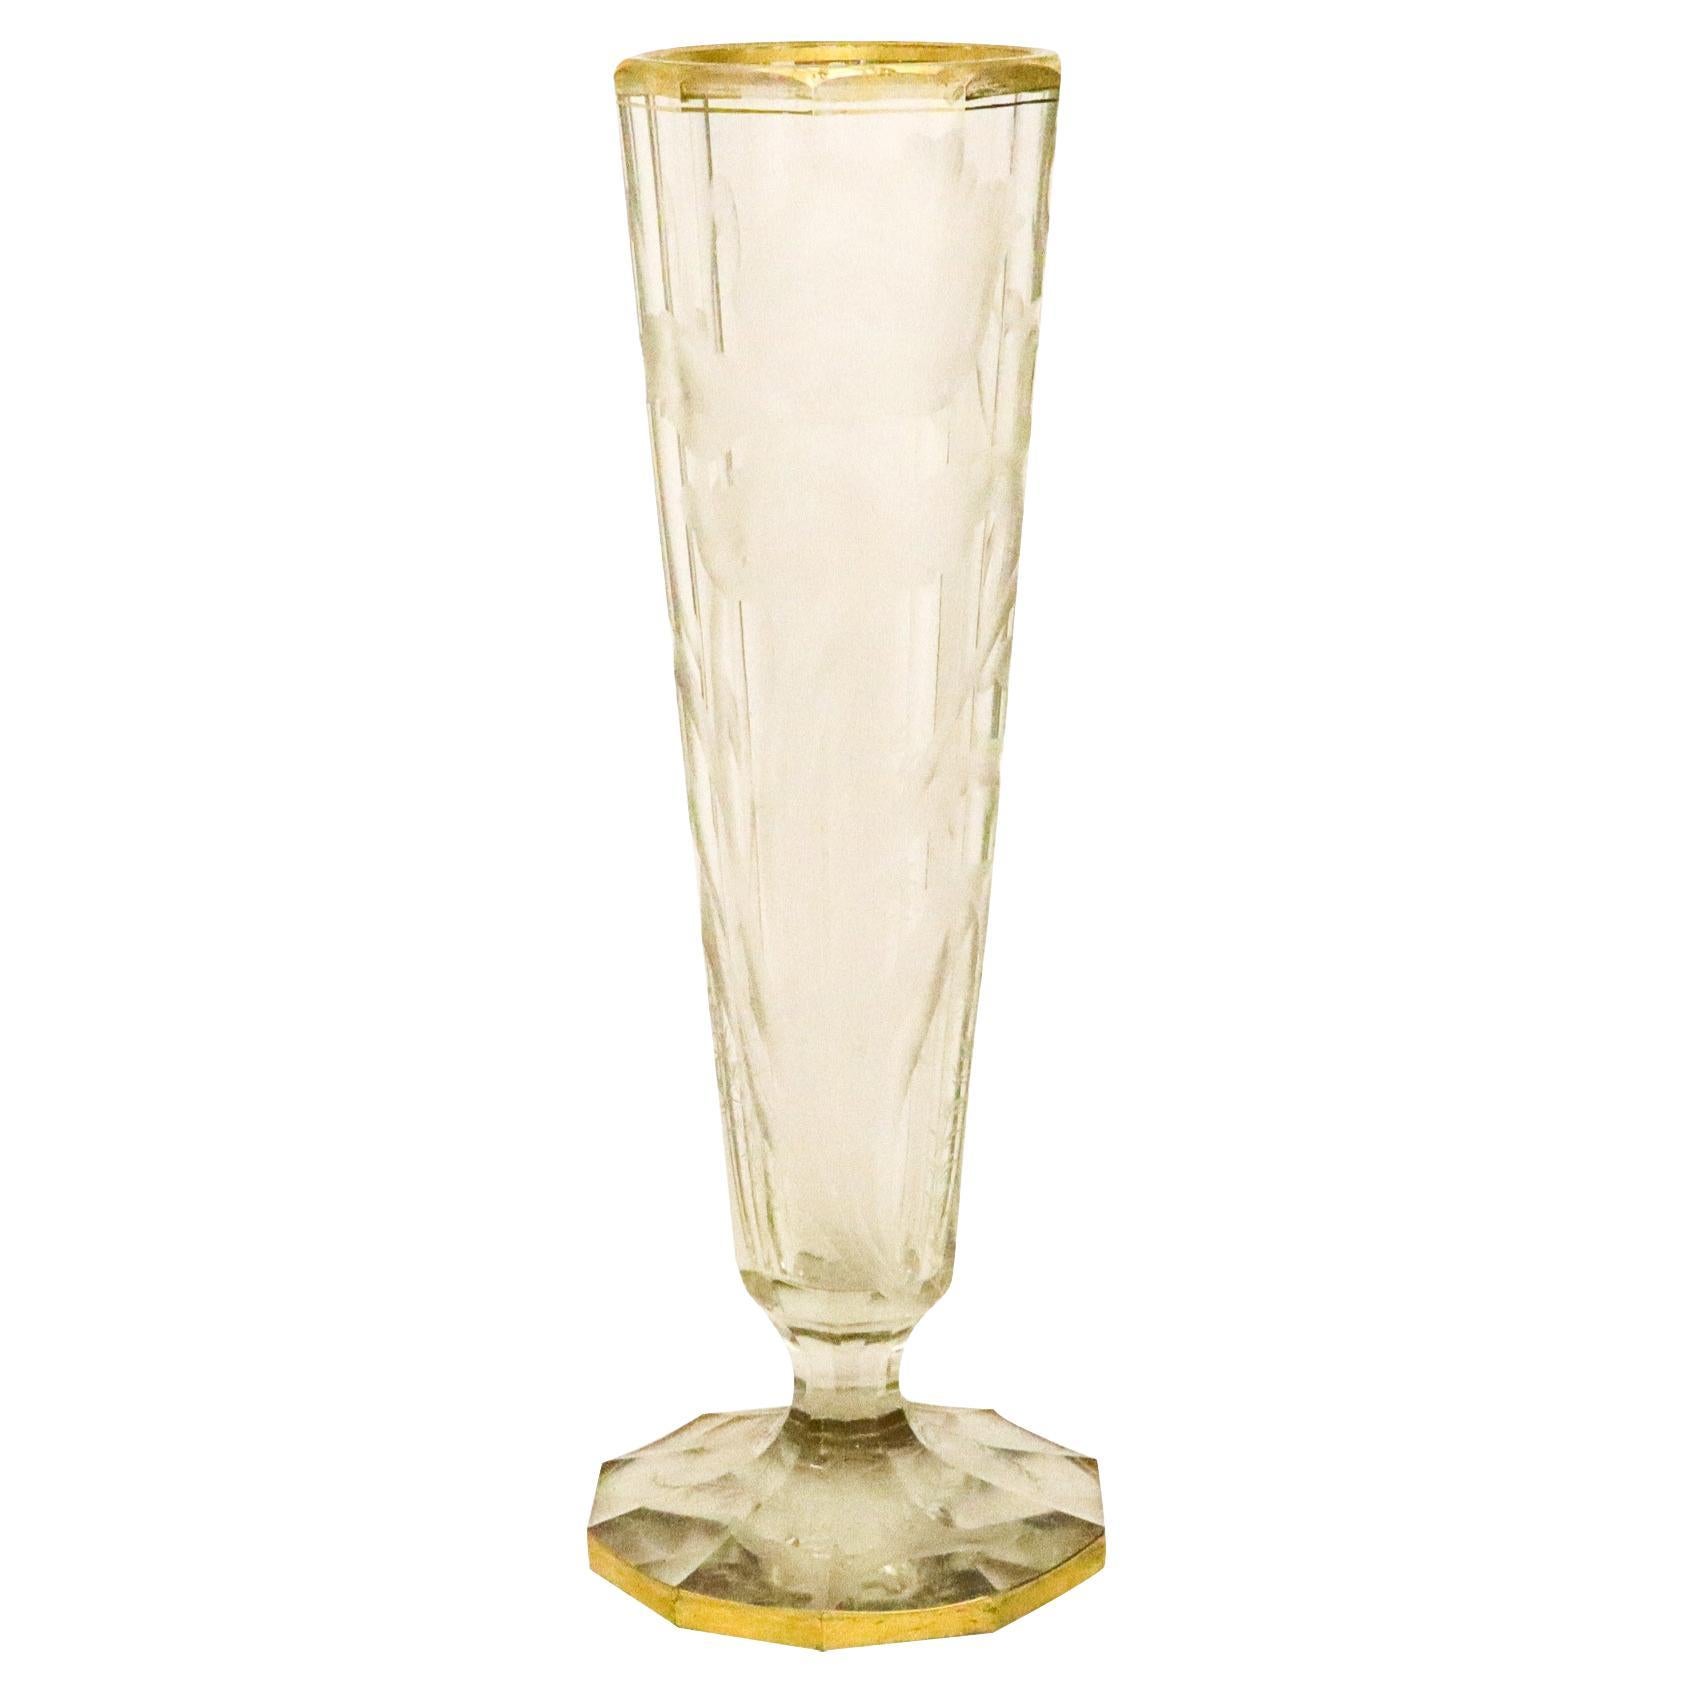 Moser 1900 Czech Bohemian Art Nouveau Tall Etched Glass Vase with 24kt Gilding For Sale